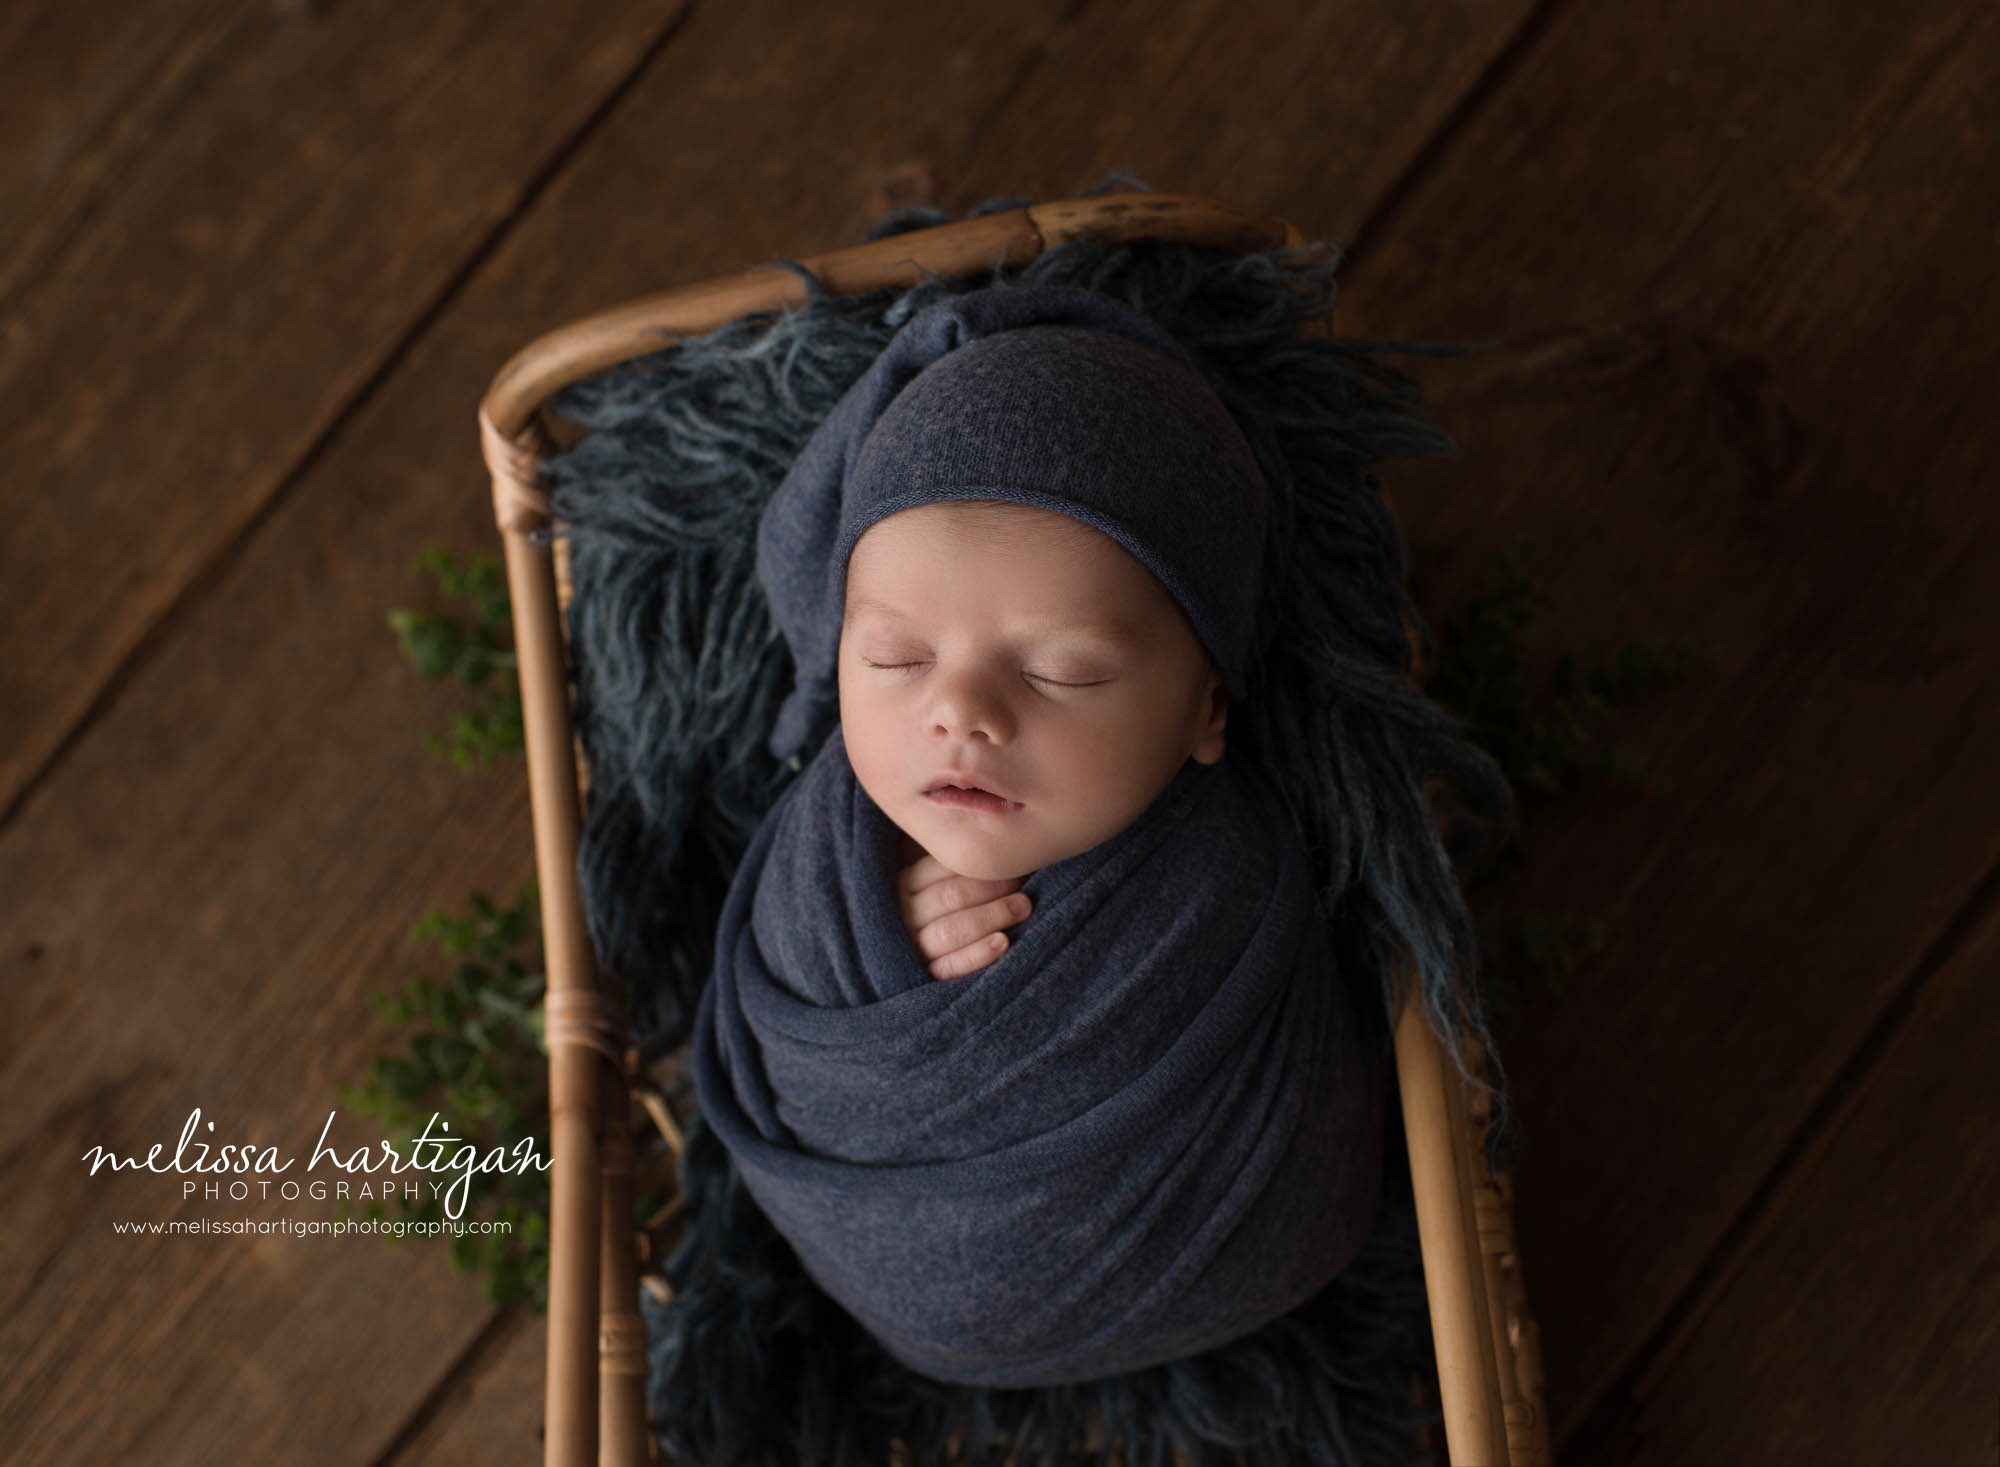 newborn baby boy posed in basket wearing blue sleepy cap and wrapped in blue wrap ct newborn photography